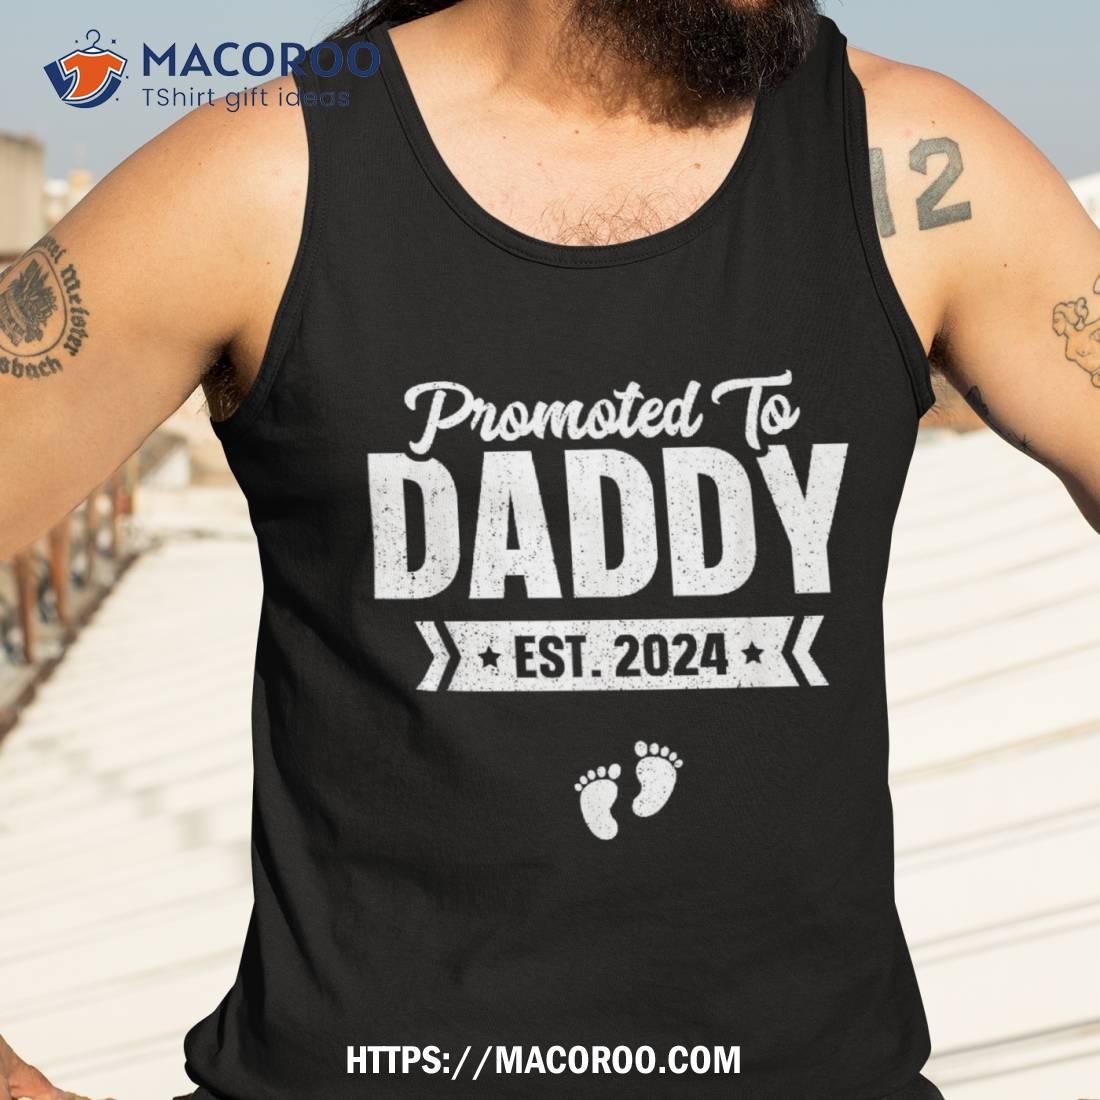 https://images.macoroo.com/wp-content/uploads/2023/10/promoted-to-daddy-est-2024-shirt-baby-gift-for-new-tank-top-3.jpg